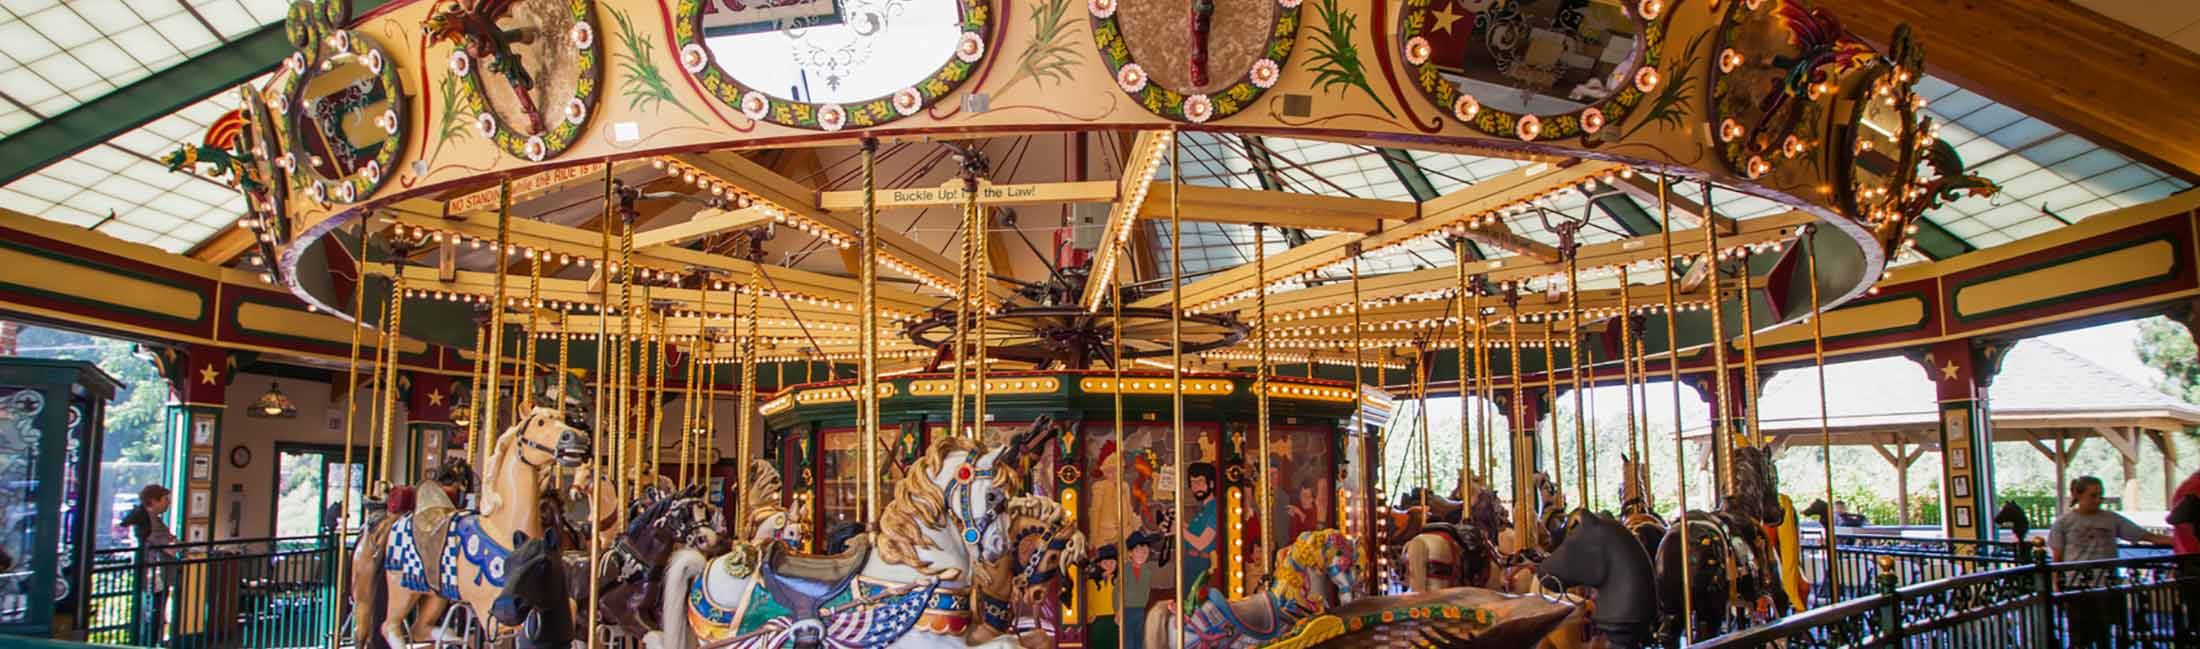 Visit A Carousel For Missoula And Dragon Hollow